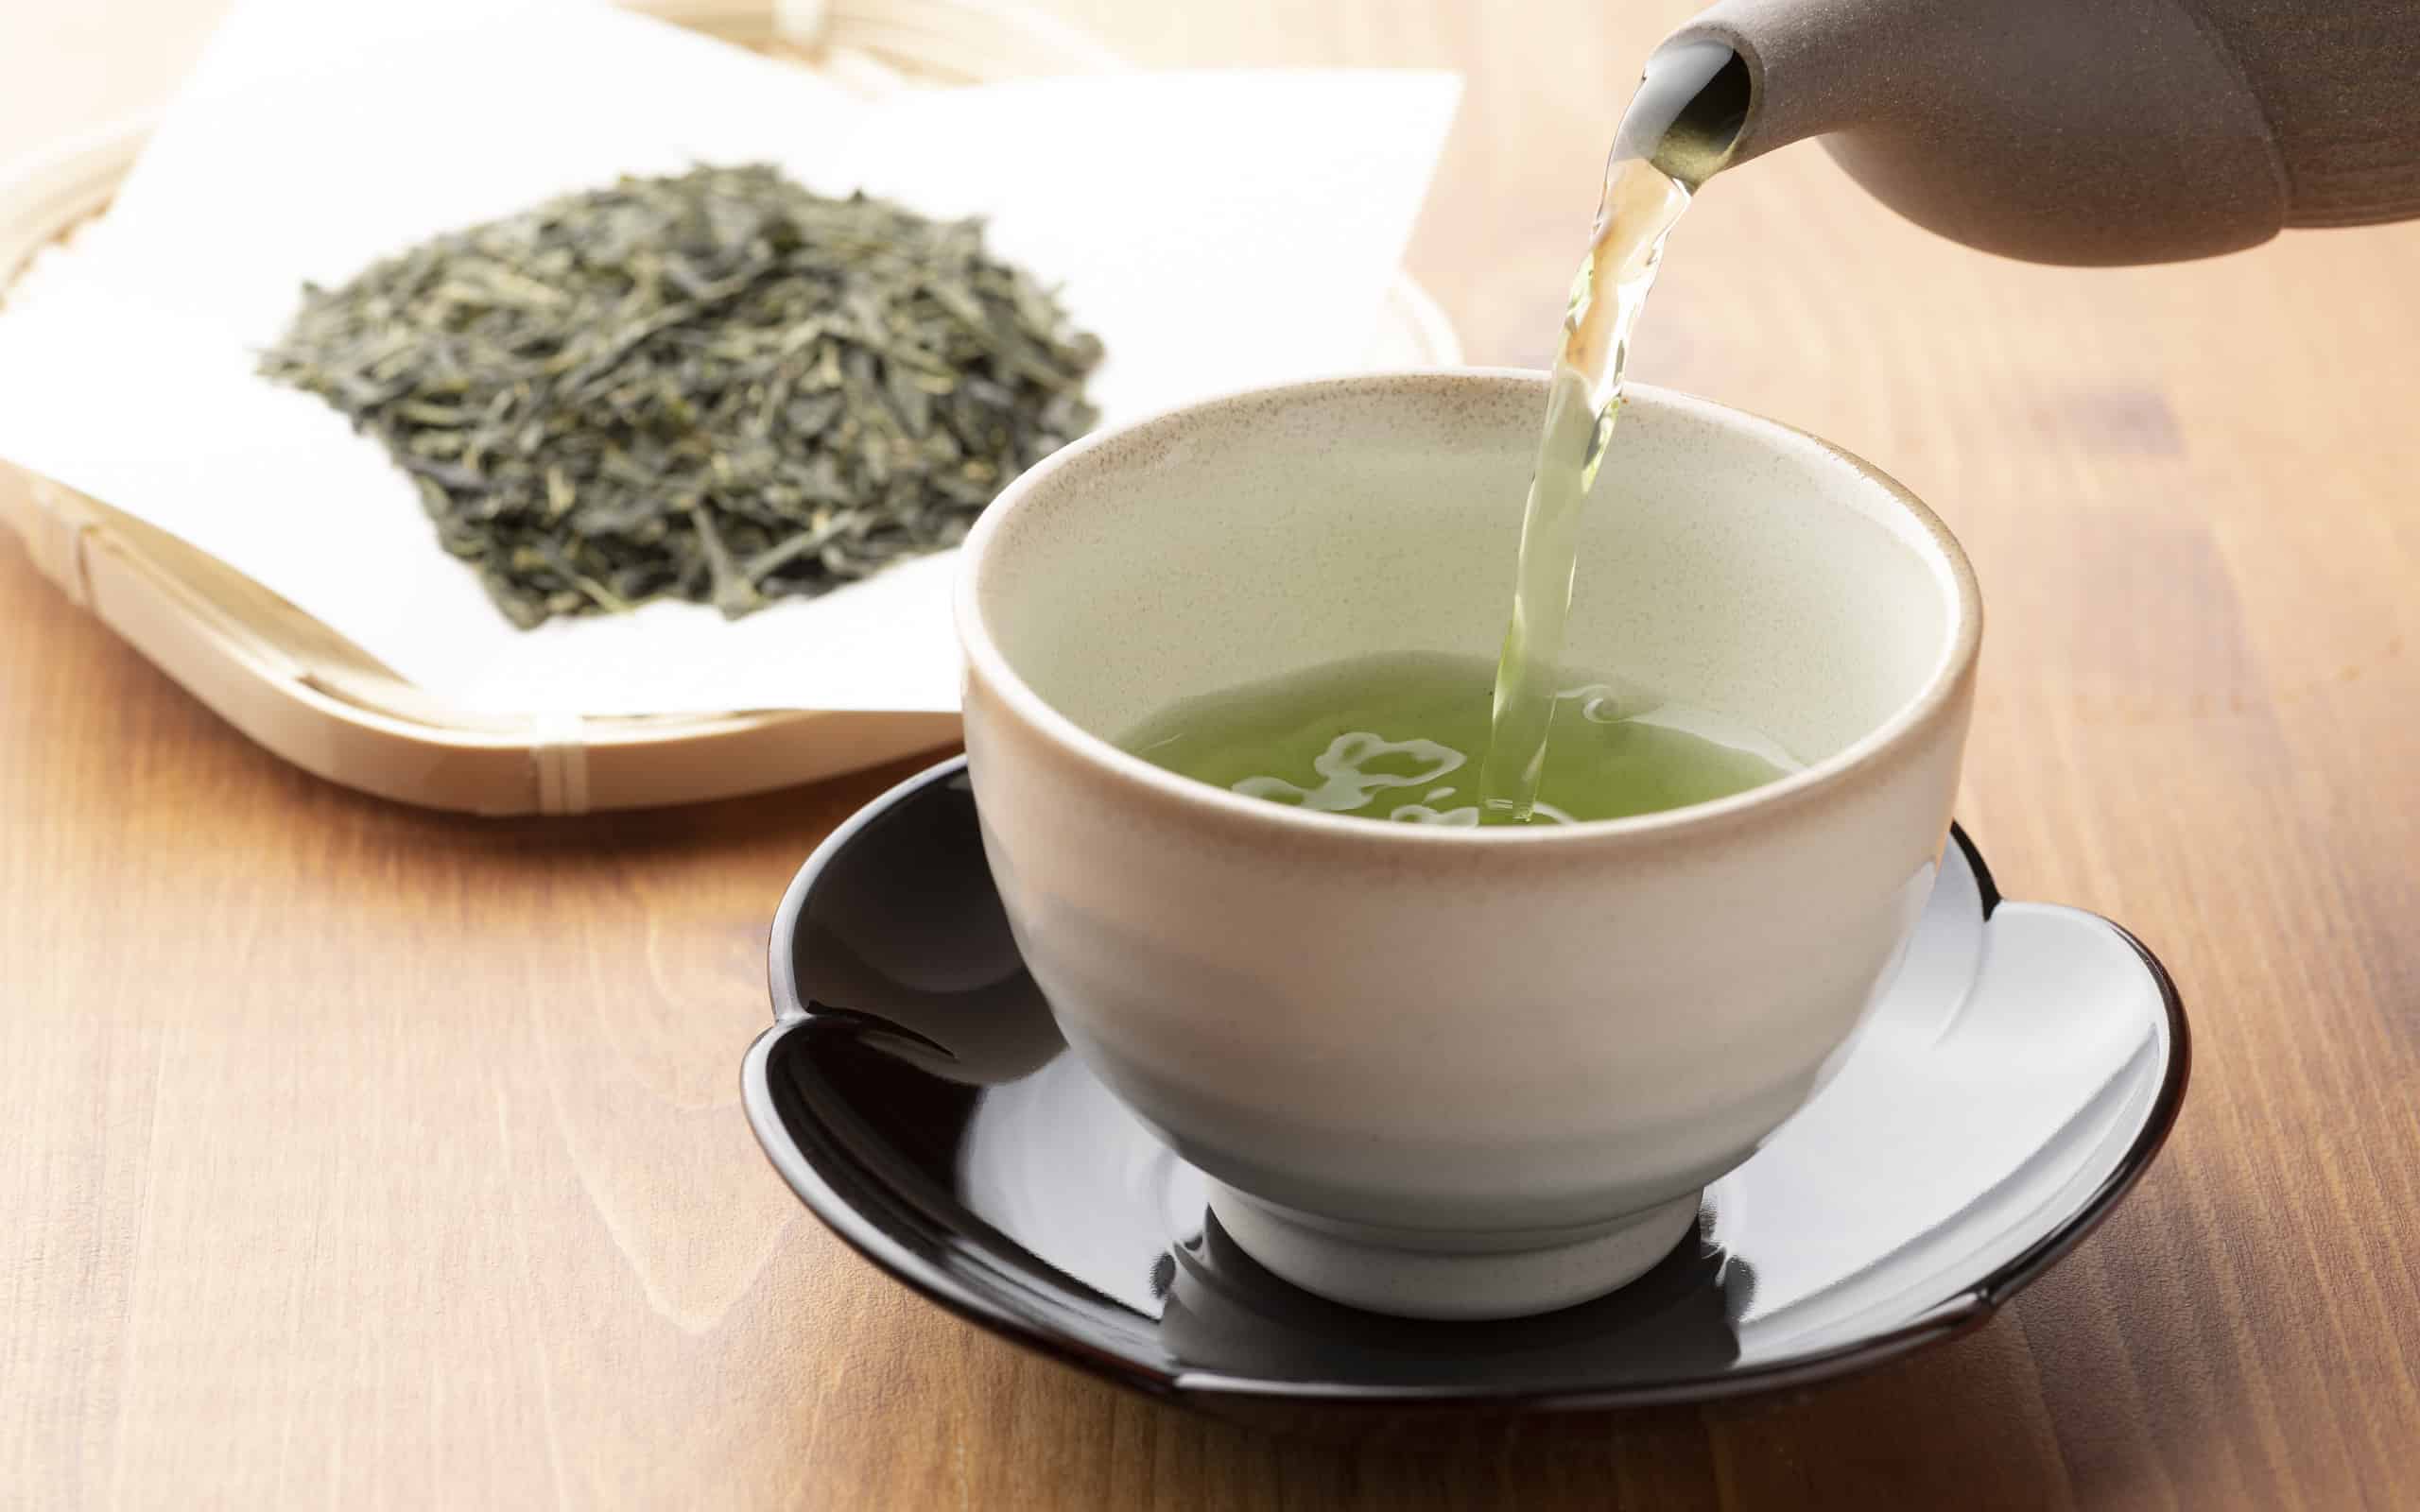 Warm green tea on a wooden table.